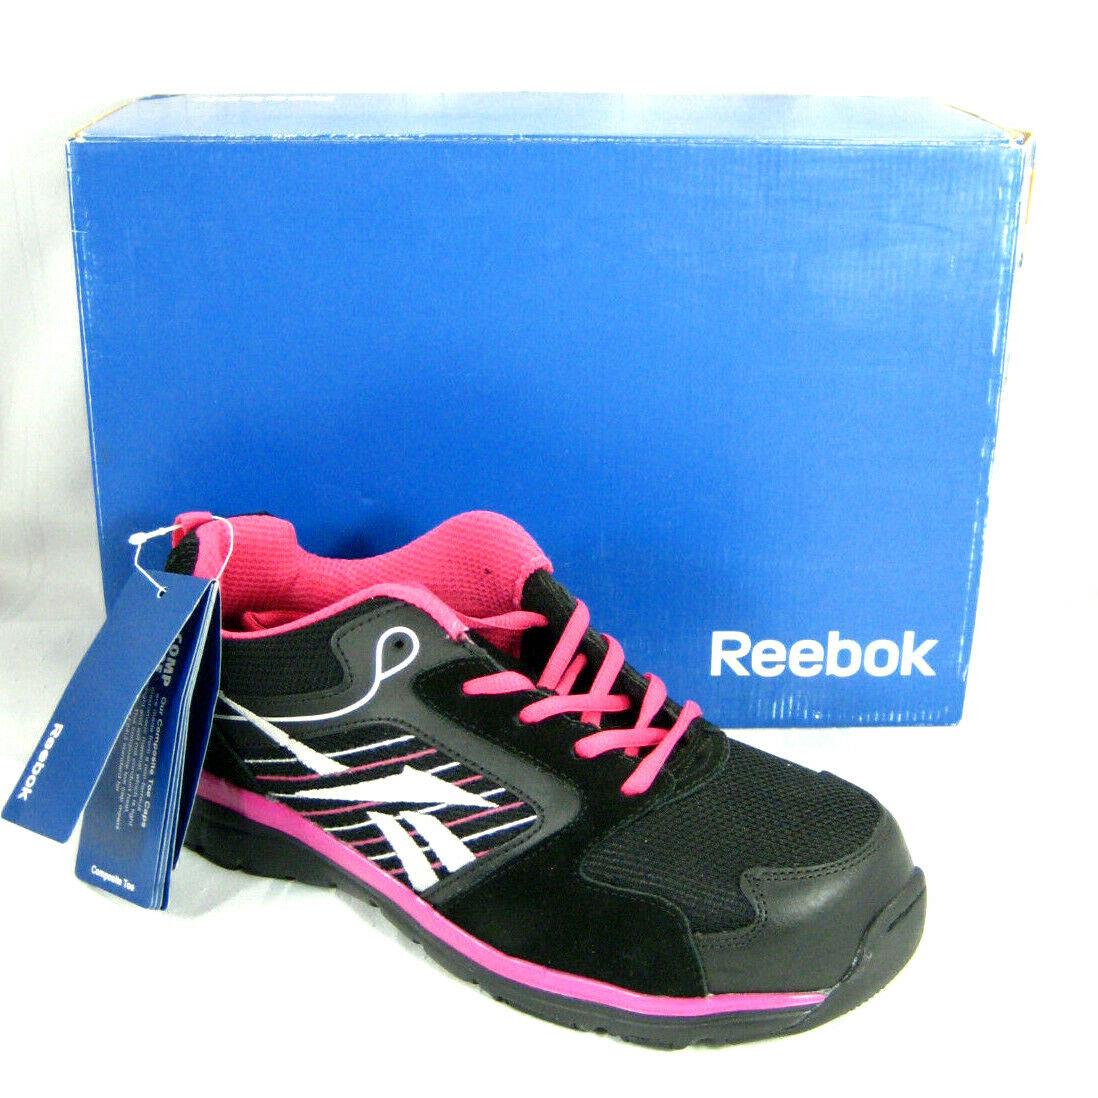 Reebok Womens Black Work Safety Hiking Shoes Composite Toe Anomar 10 M RB454